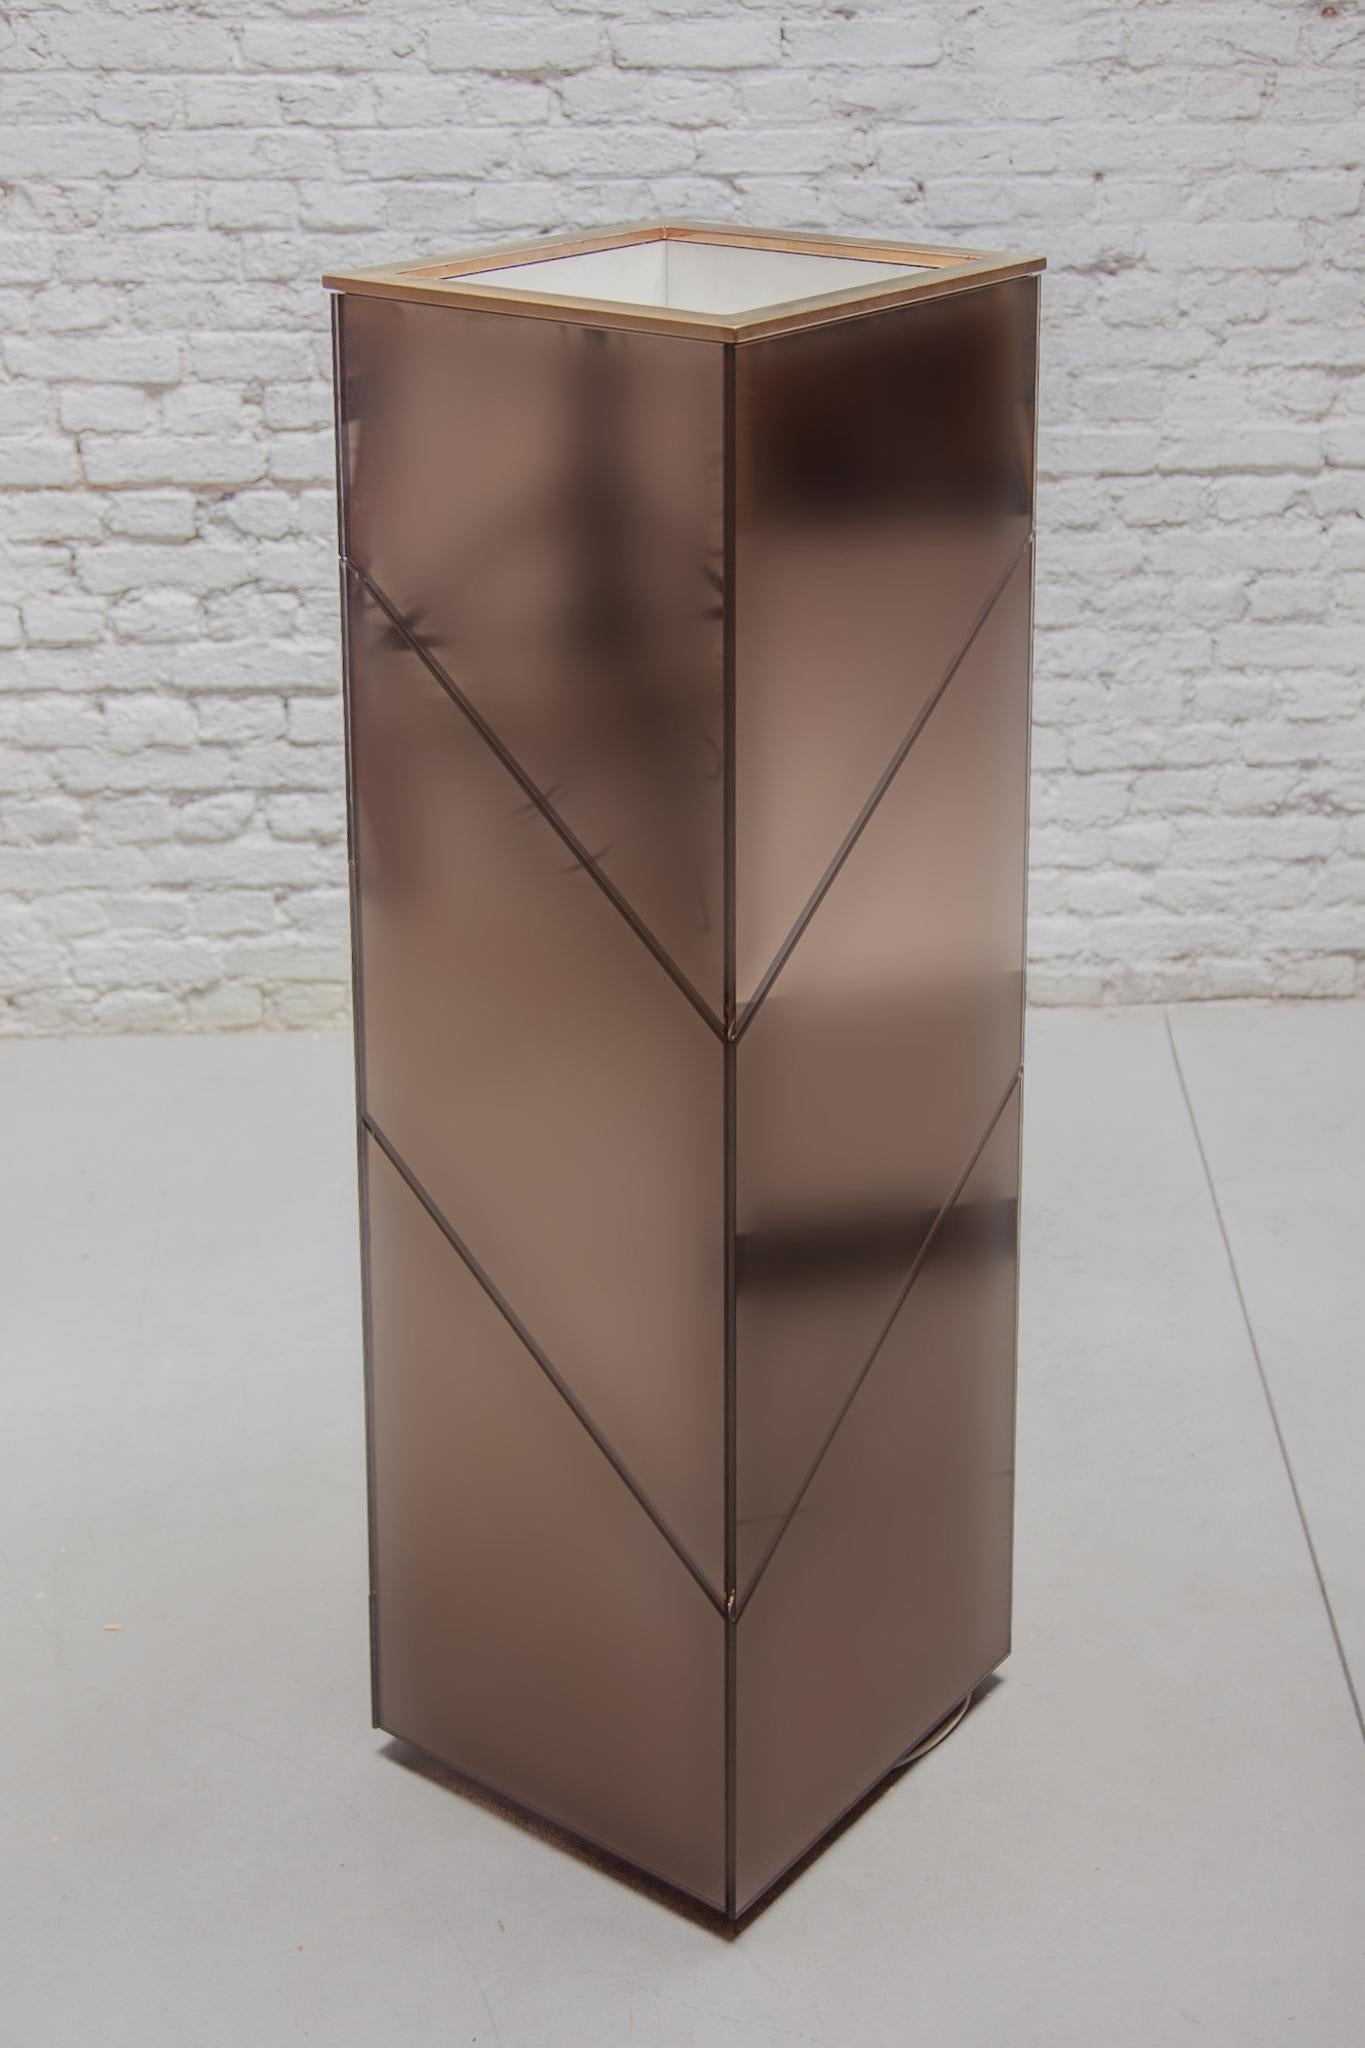 Late 20th Century Smoked Mirrored Planter, Floor Lamp 1970s designed by Belgo chrome For Sale